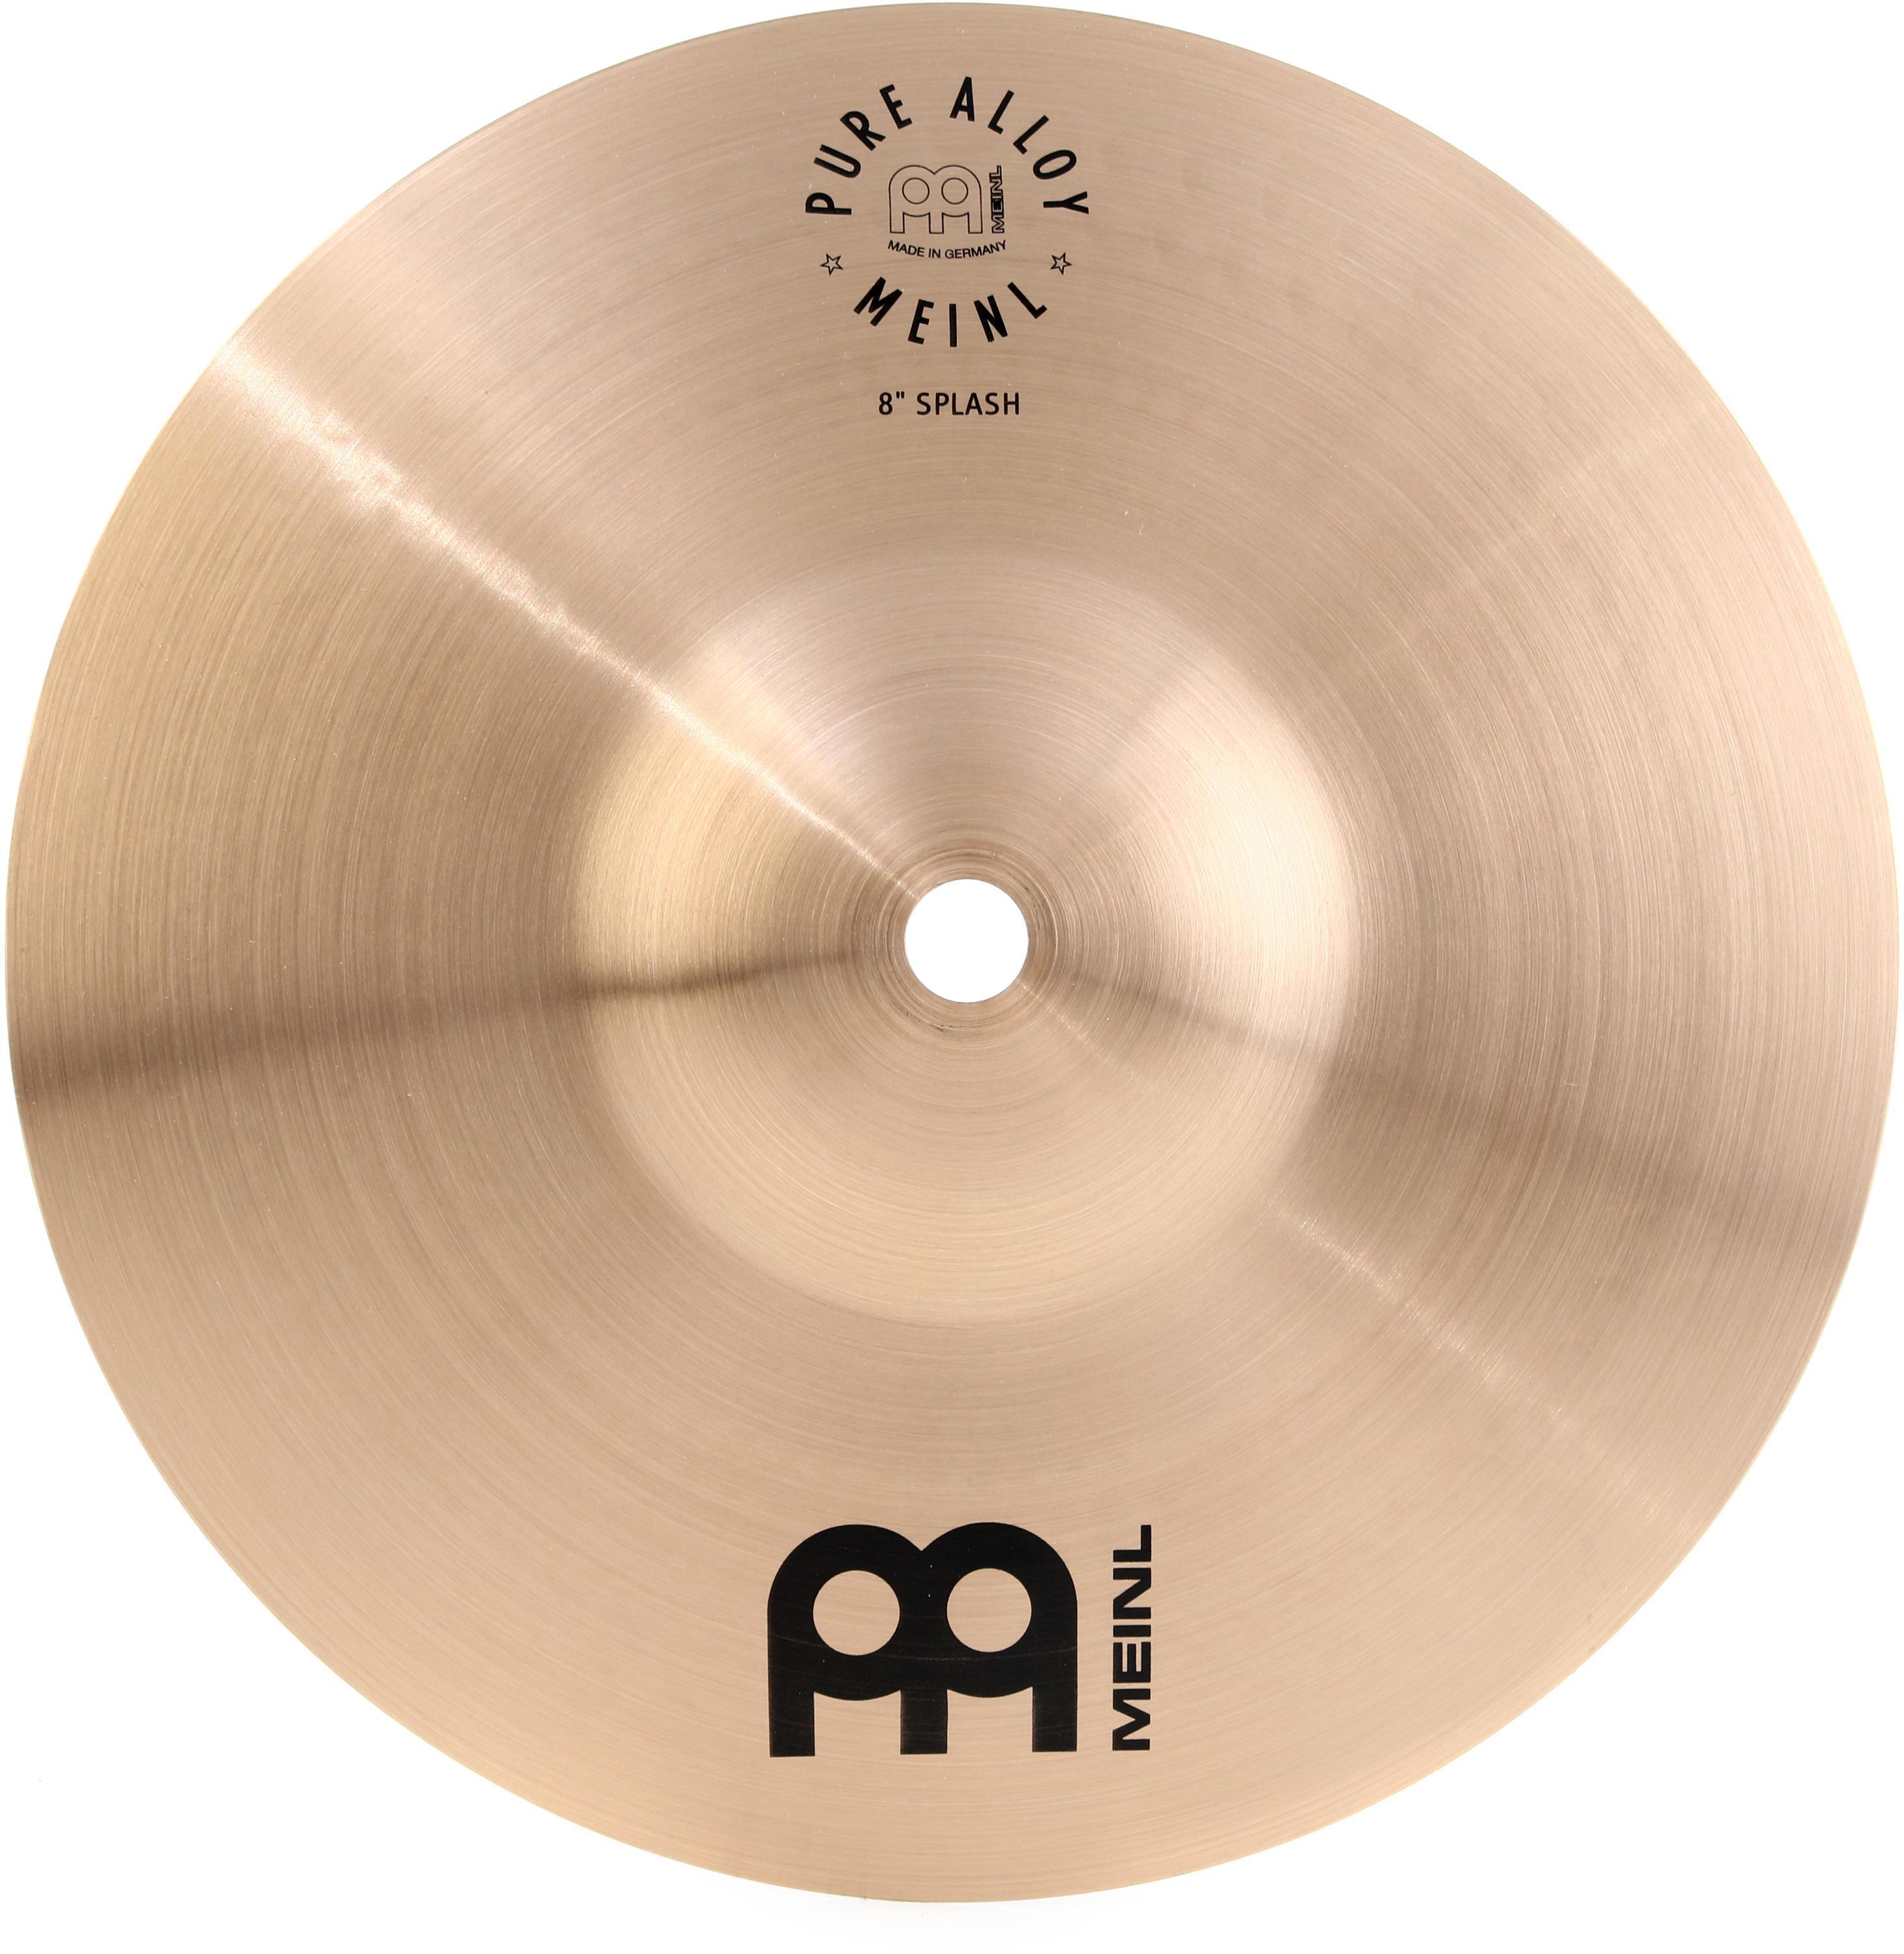 Meinl Cymbals Pure Alloy Splash Cymbal - 8 inch, Traditional